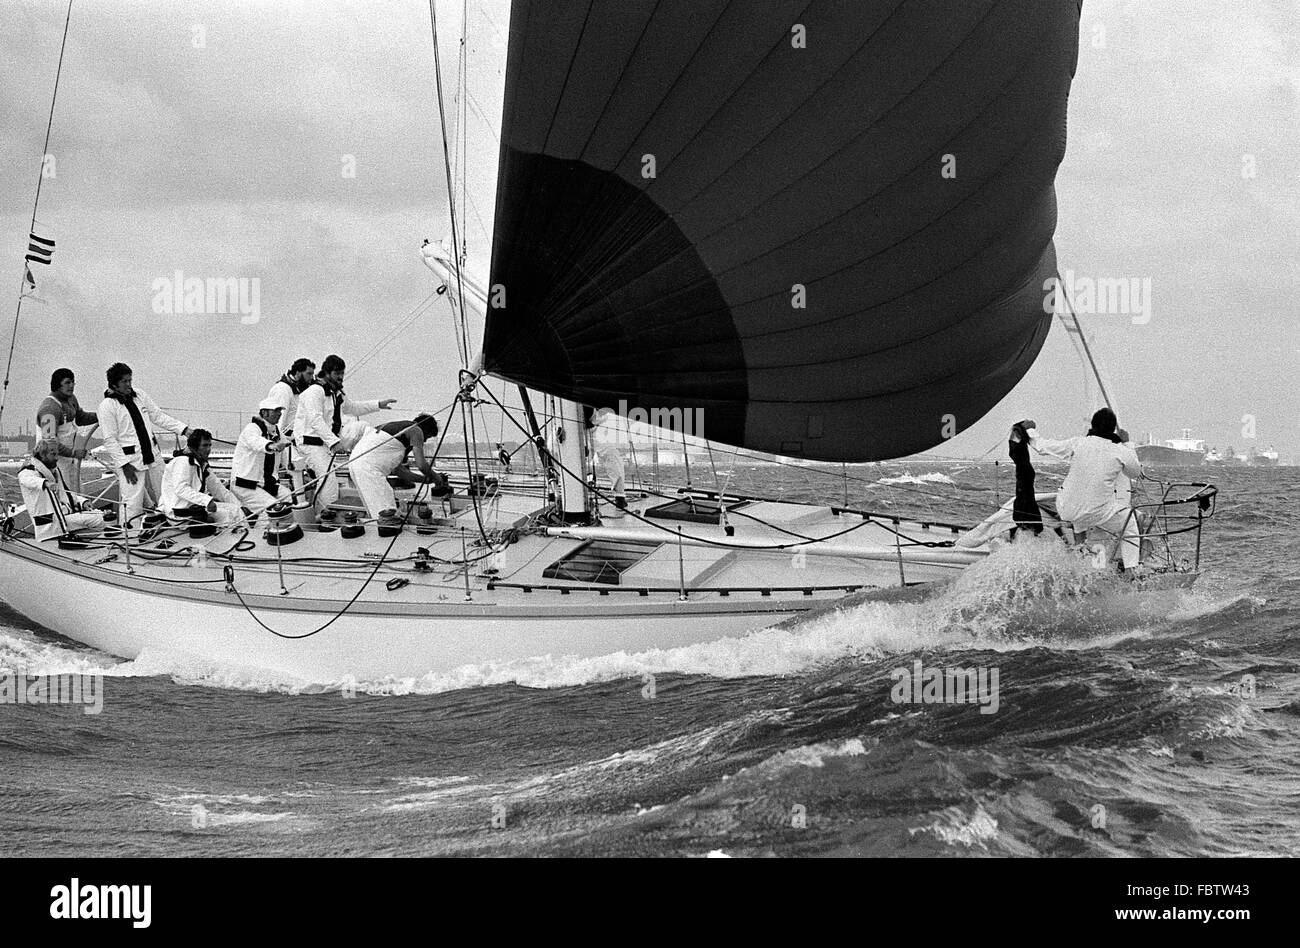 AJAXNETPHOTO. 1979. SOLENT, ENGLAND. - ADMIRAL'S CUP SOLENT INSHORE RACE - MORNING CLOUD, WITH OWEN PARKER IN THE AFTERGUARD. PHOTO:JONATHAN EASTLAND/AJAX REF:79 2034 Stock Photo